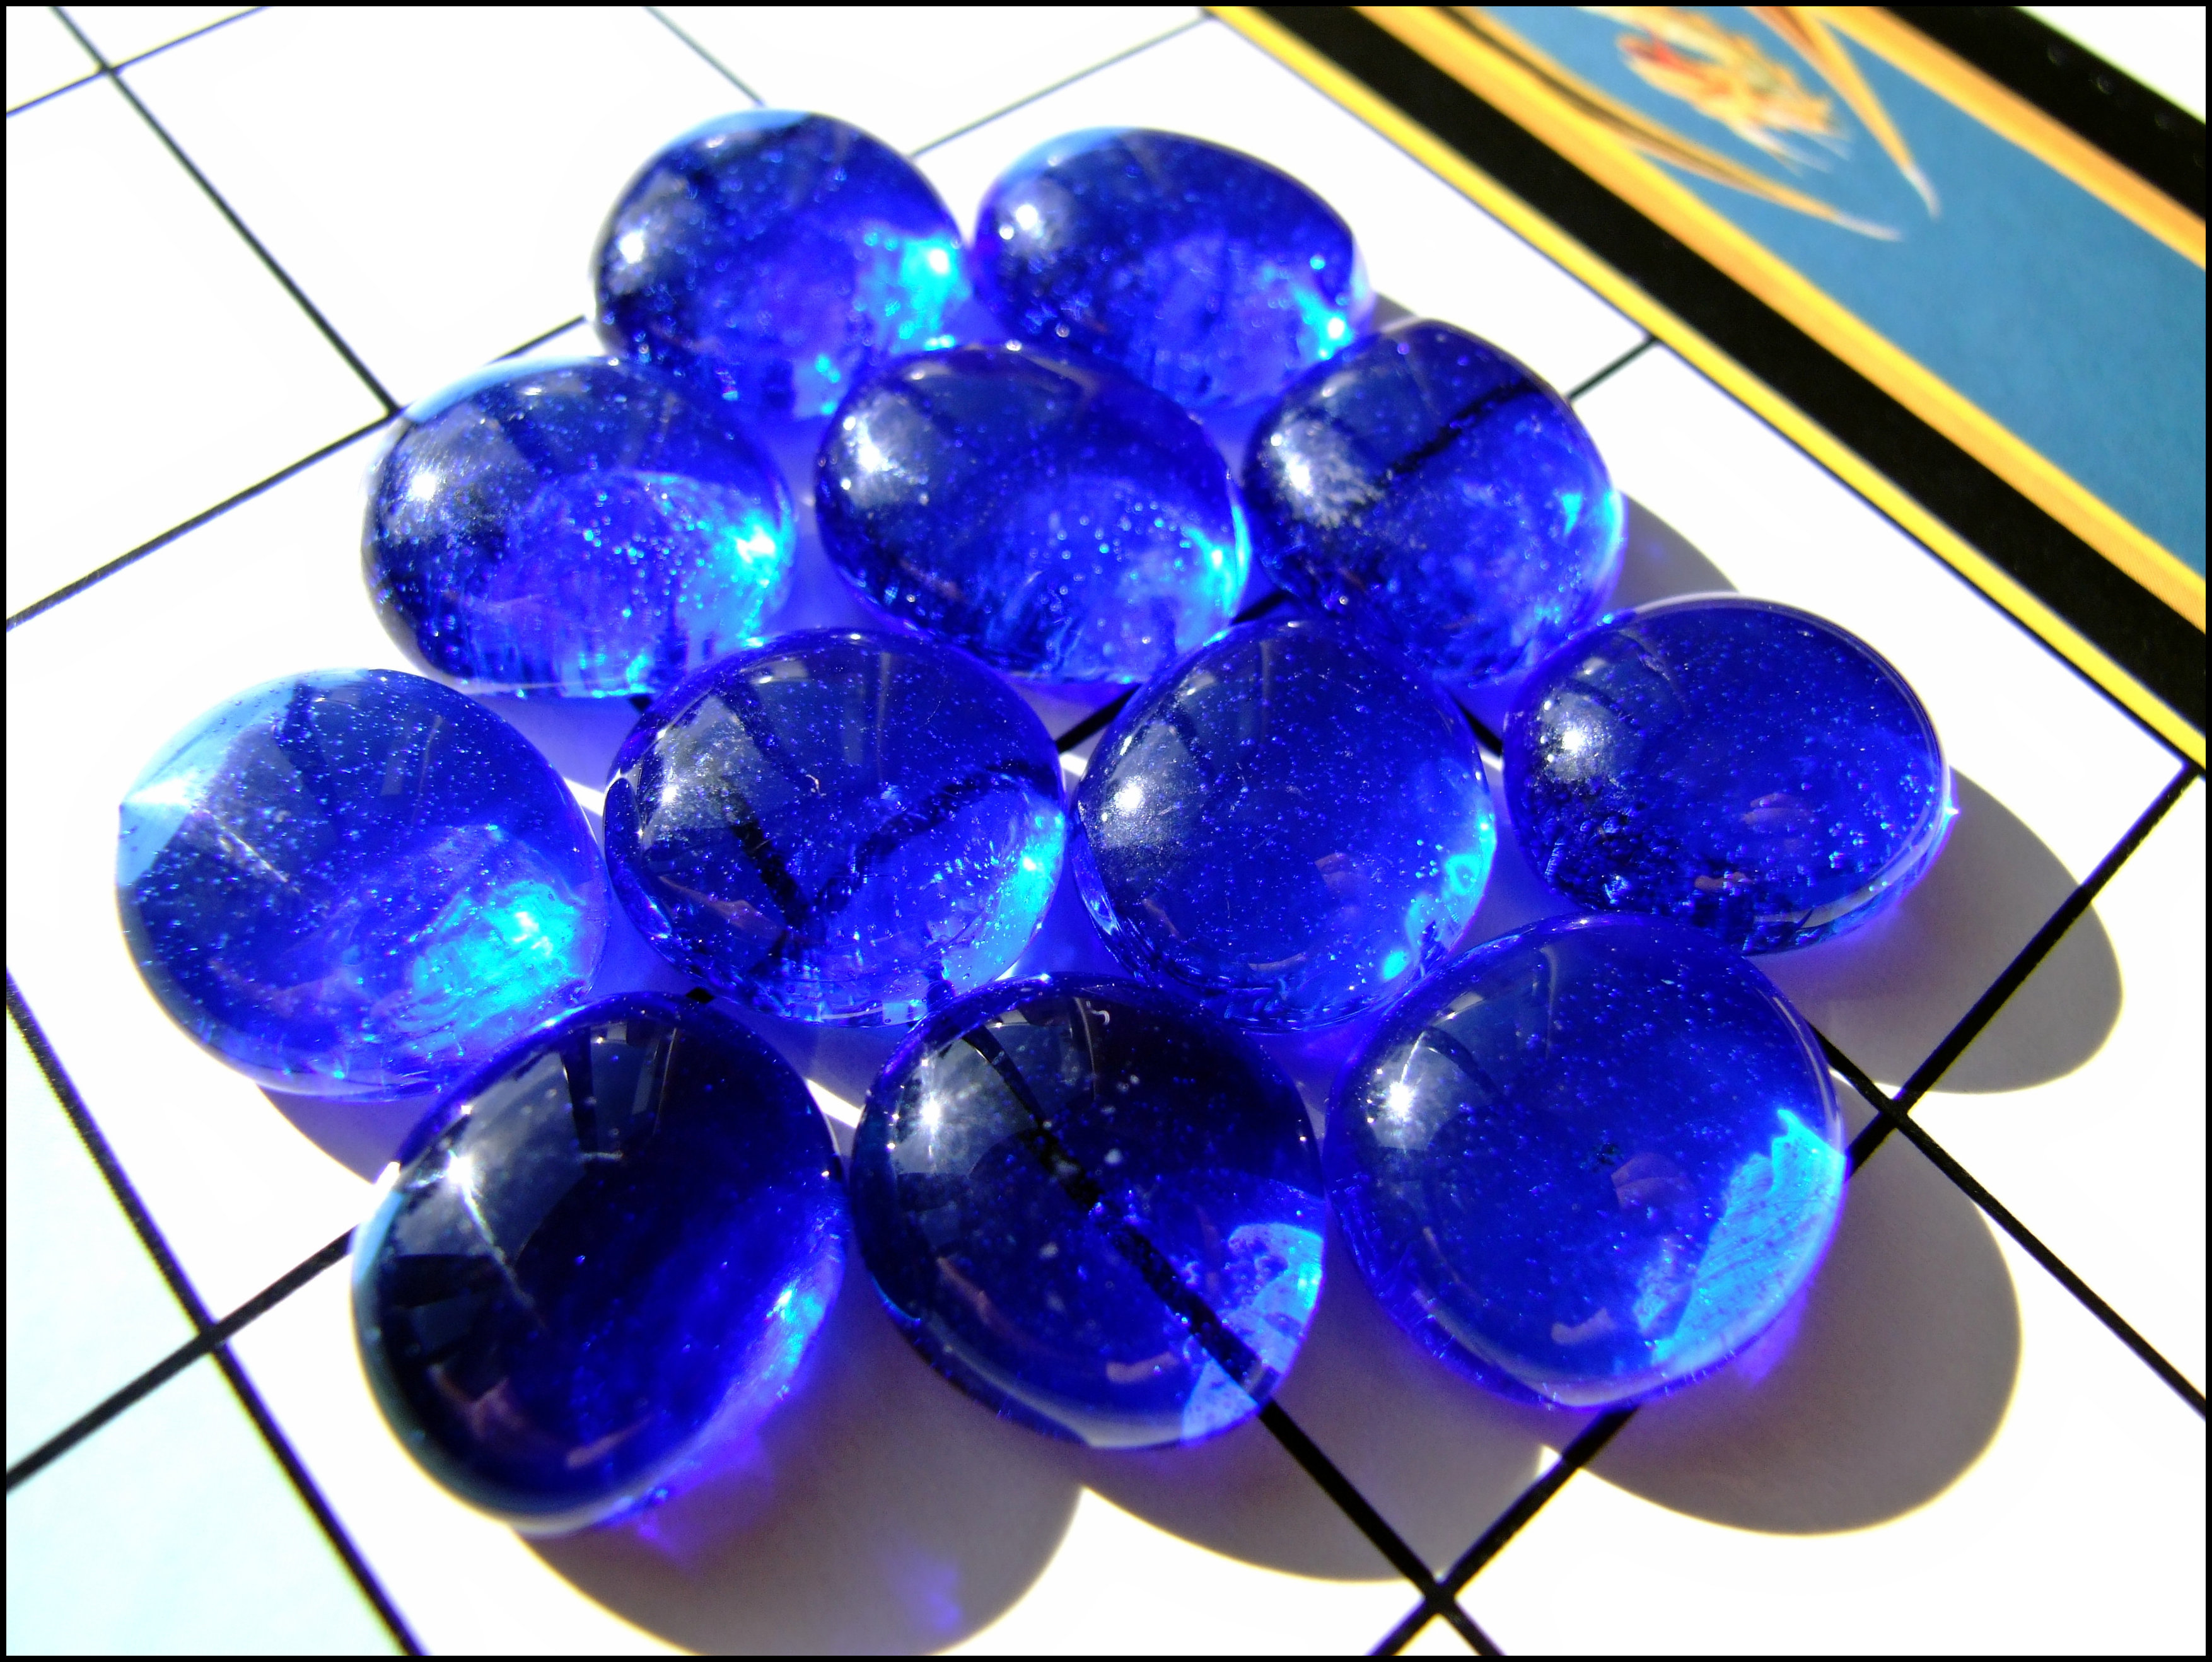 Mage Stones - The Blue Mage Stones